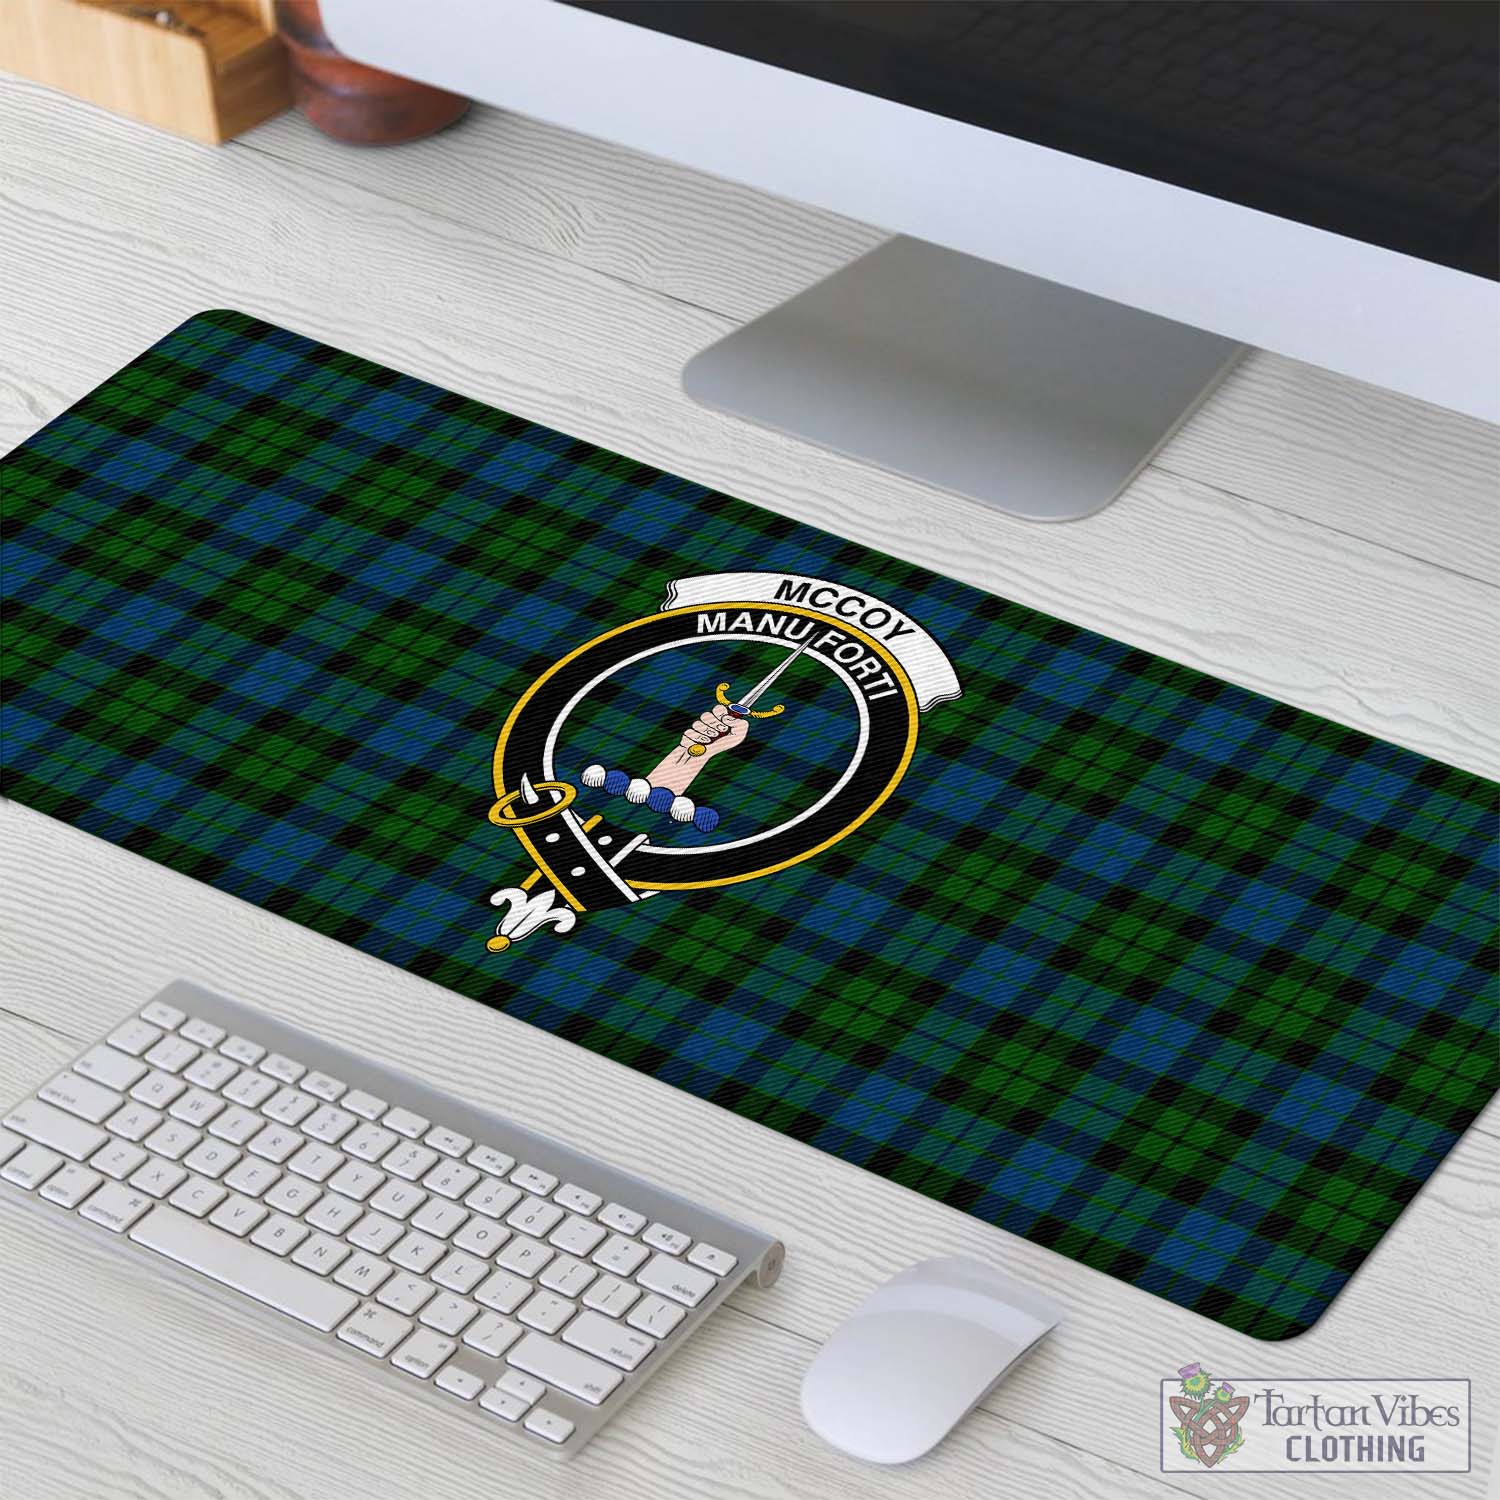 Tartan Vibes Clothing McCoy Tartan Mouse Pad with Family Crest